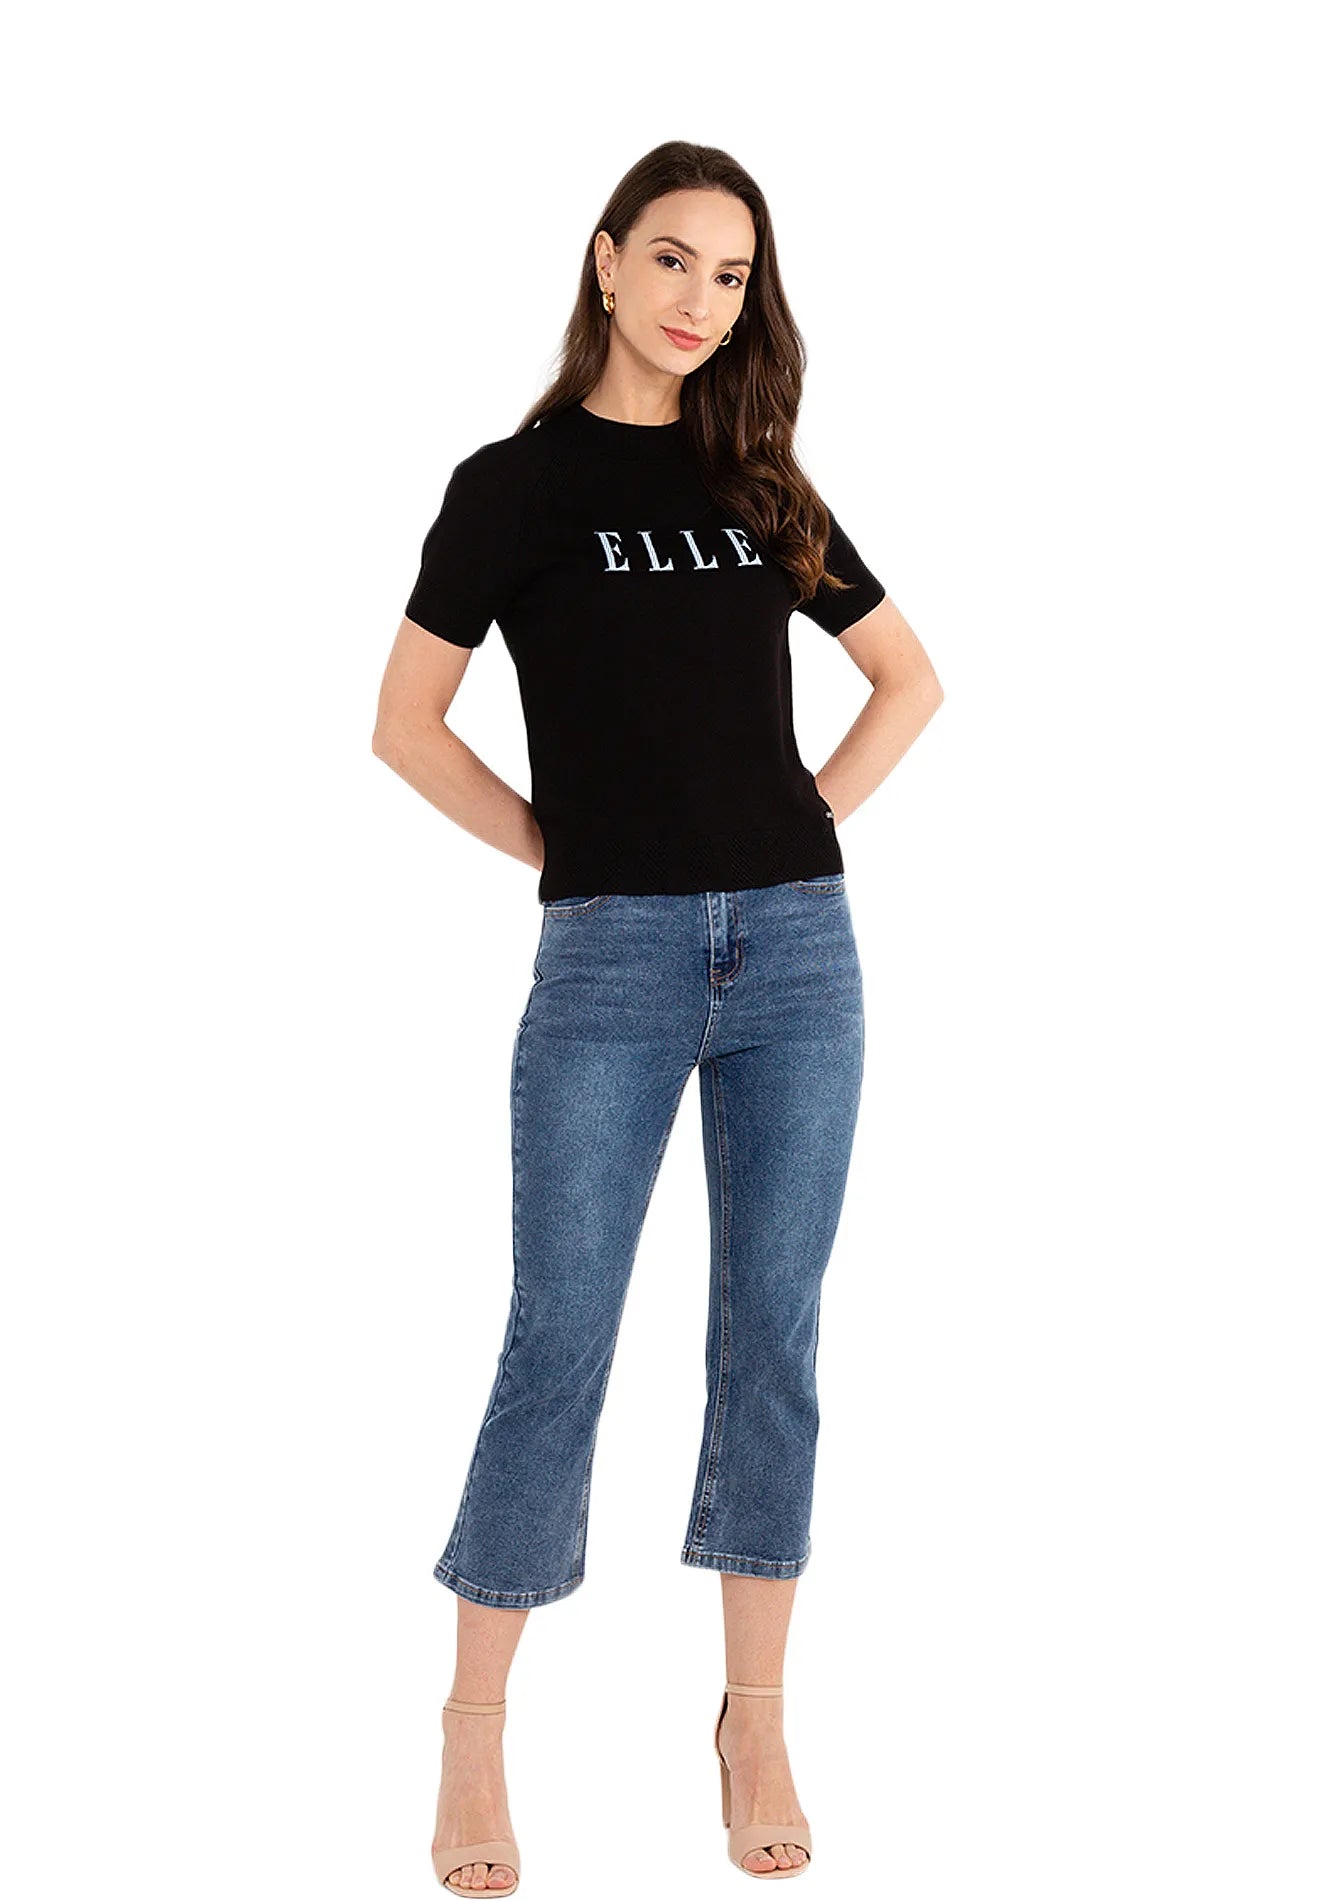 ELLE Apparel Knitted Top